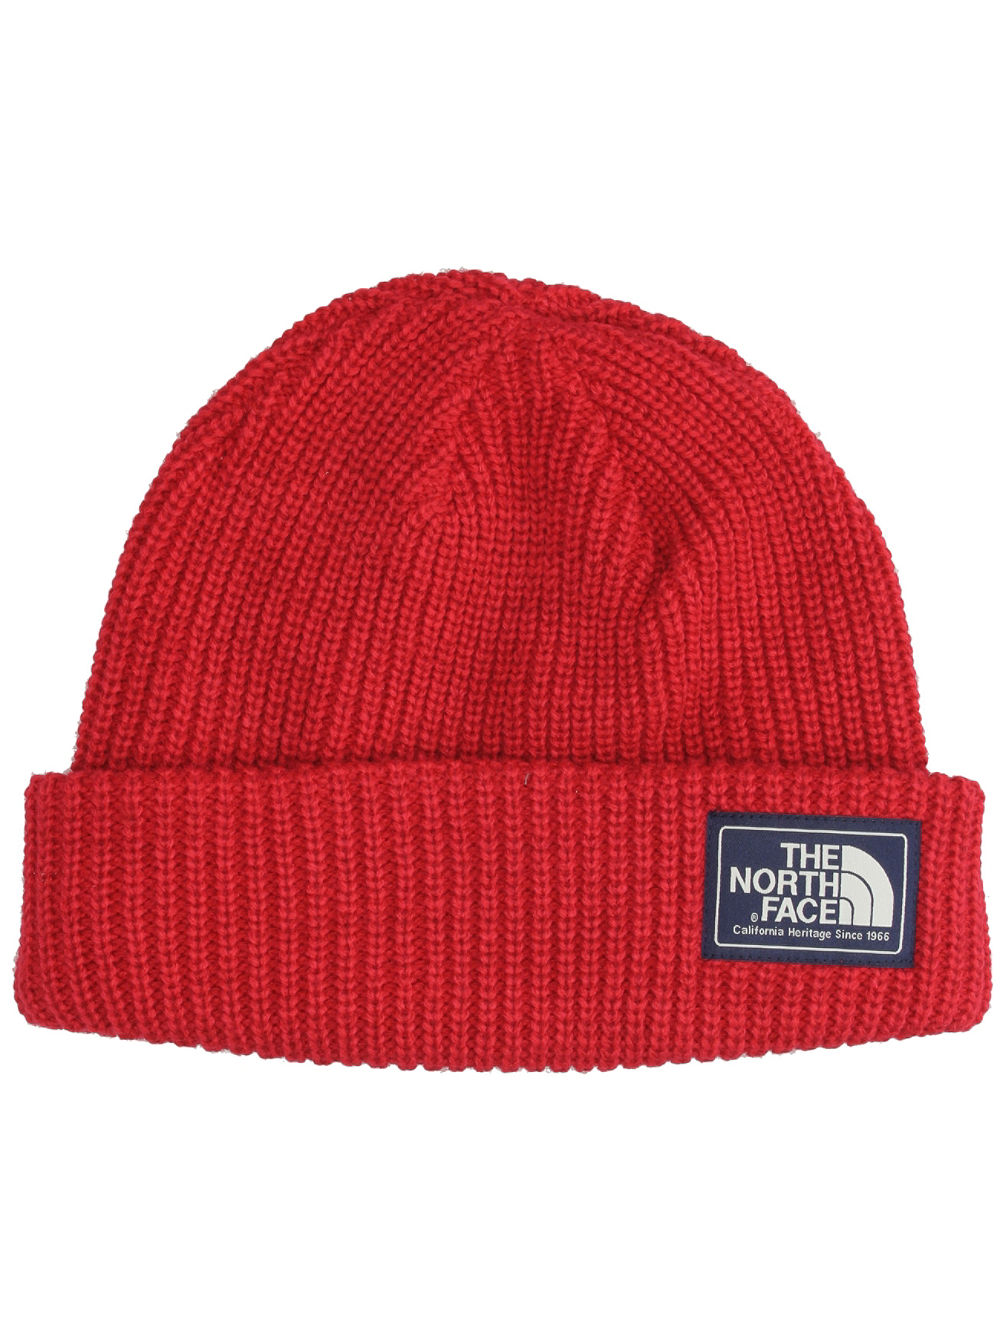 Buy THE NORTH FACE Salty Dog Beanie online at blue-tomato.com